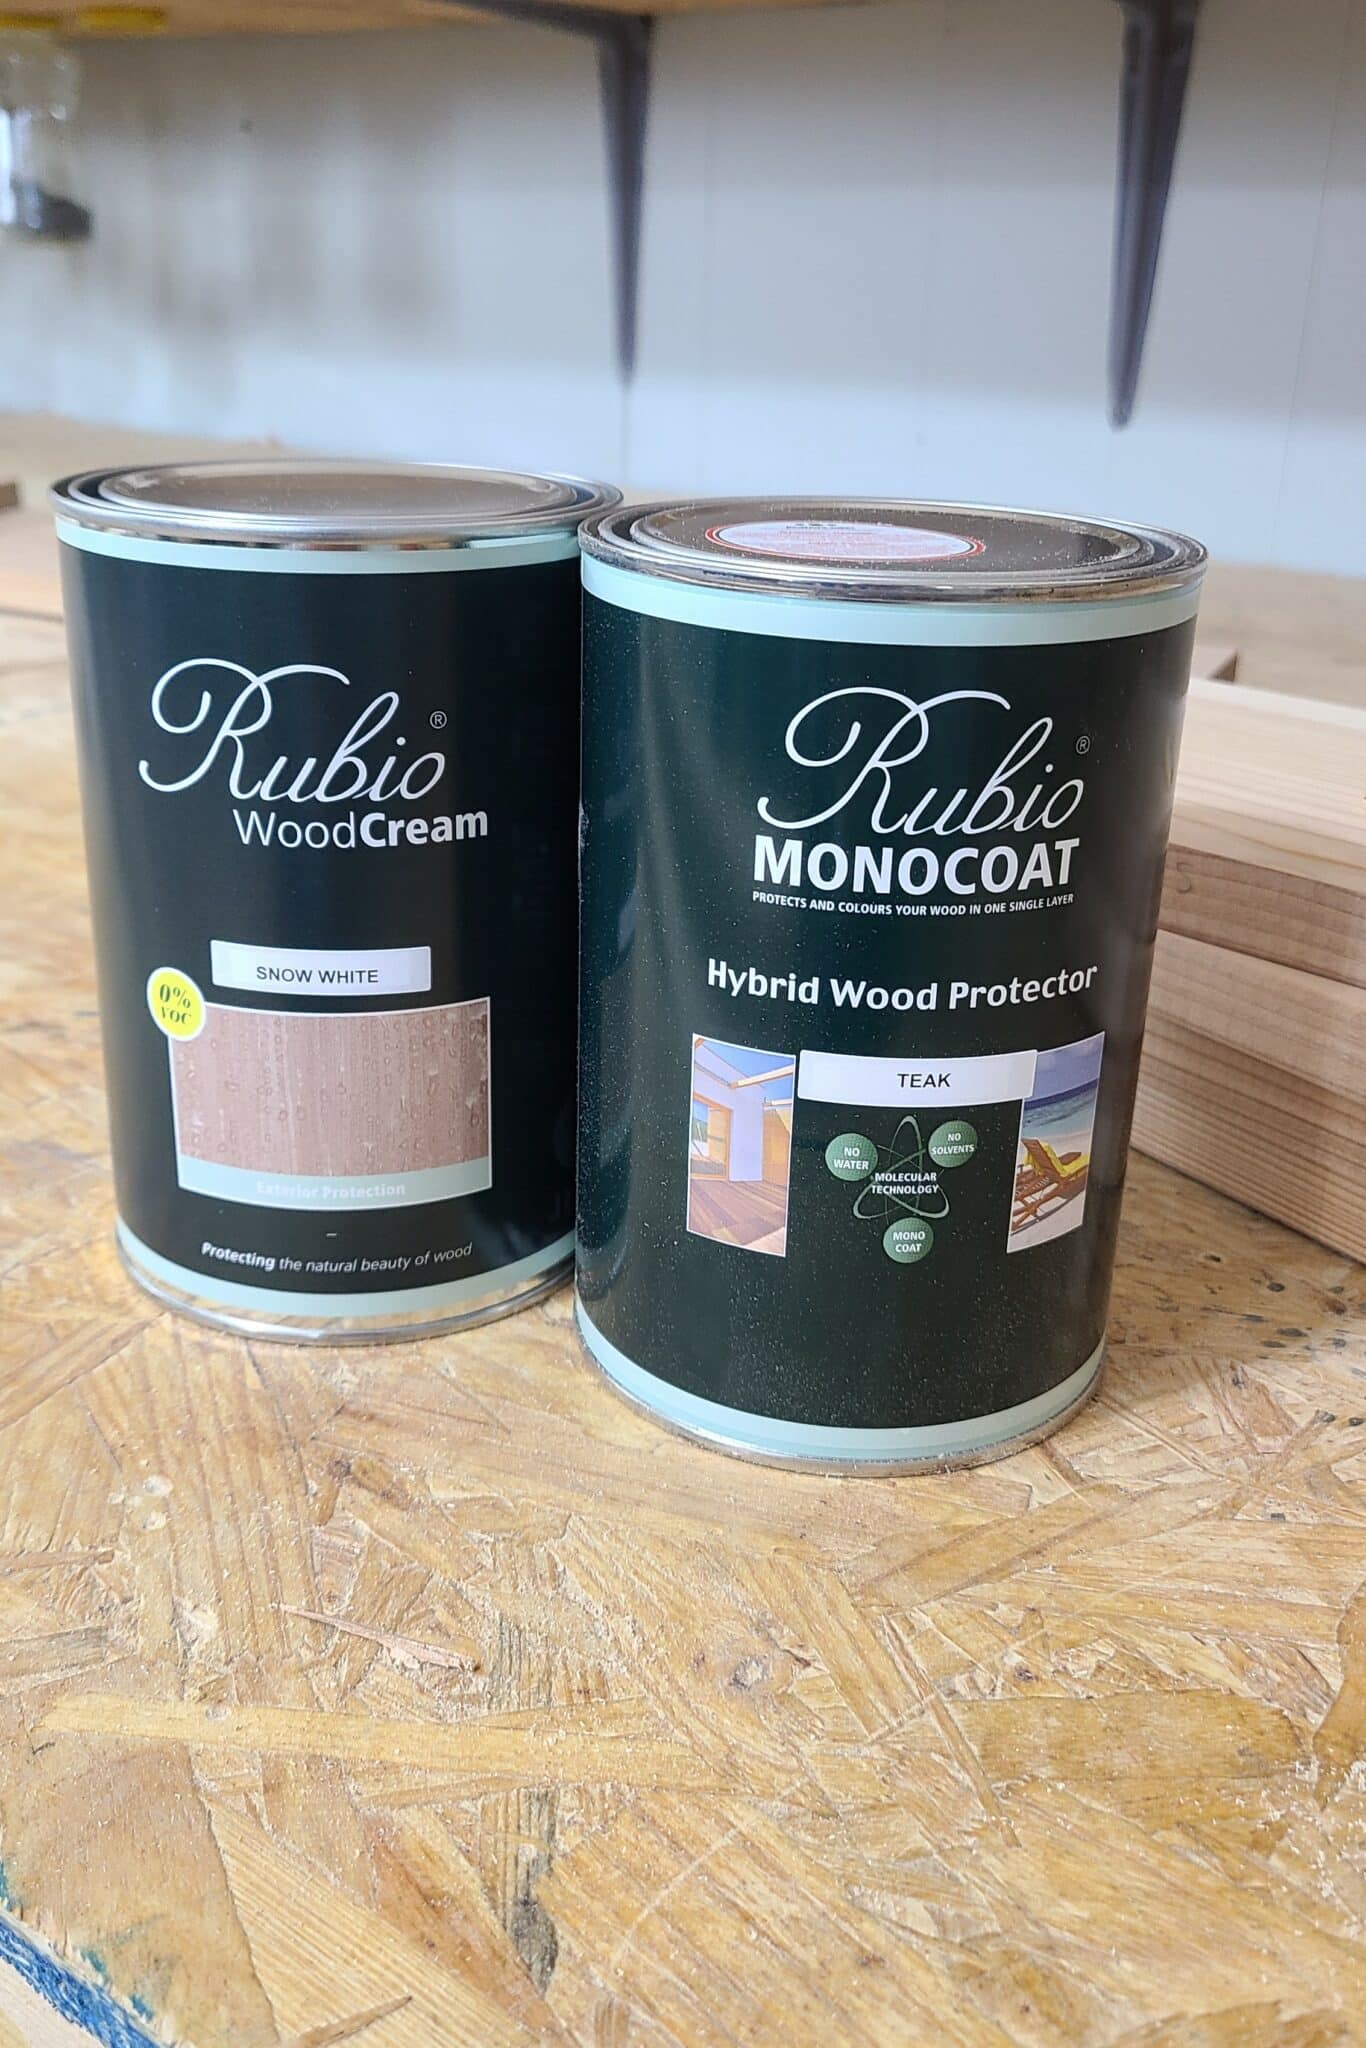 Picture of Rubio's WoodCream next to Rubio's Hybrid Wood Protector sitting on a workbench surface